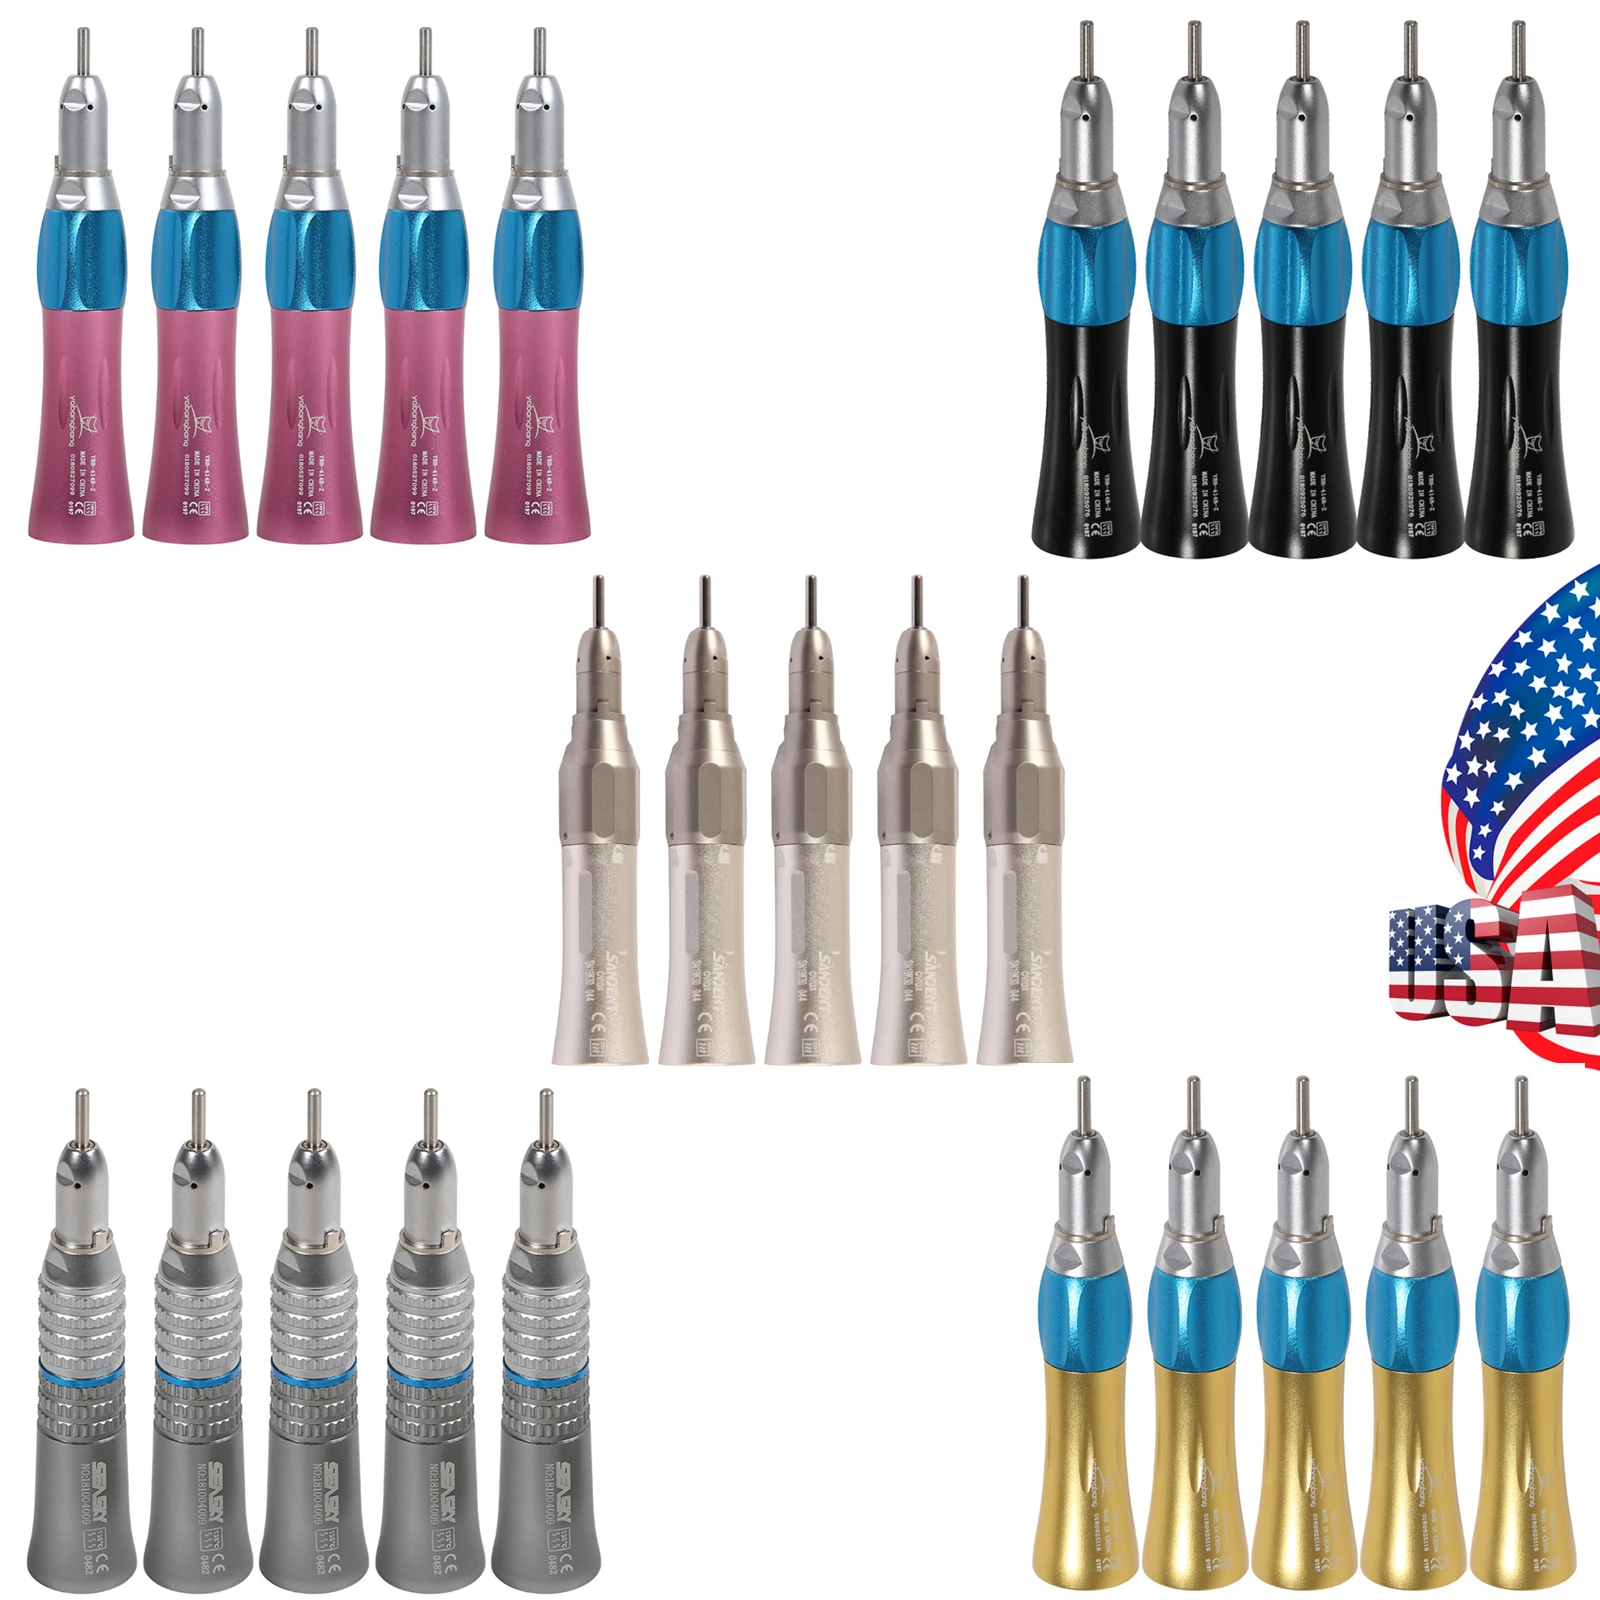 5Pcs NSK Style Dental Slow Low Speed 1:1 Ratio External/Outer Water Spray Straight Handpiece Nosecone E-type USA